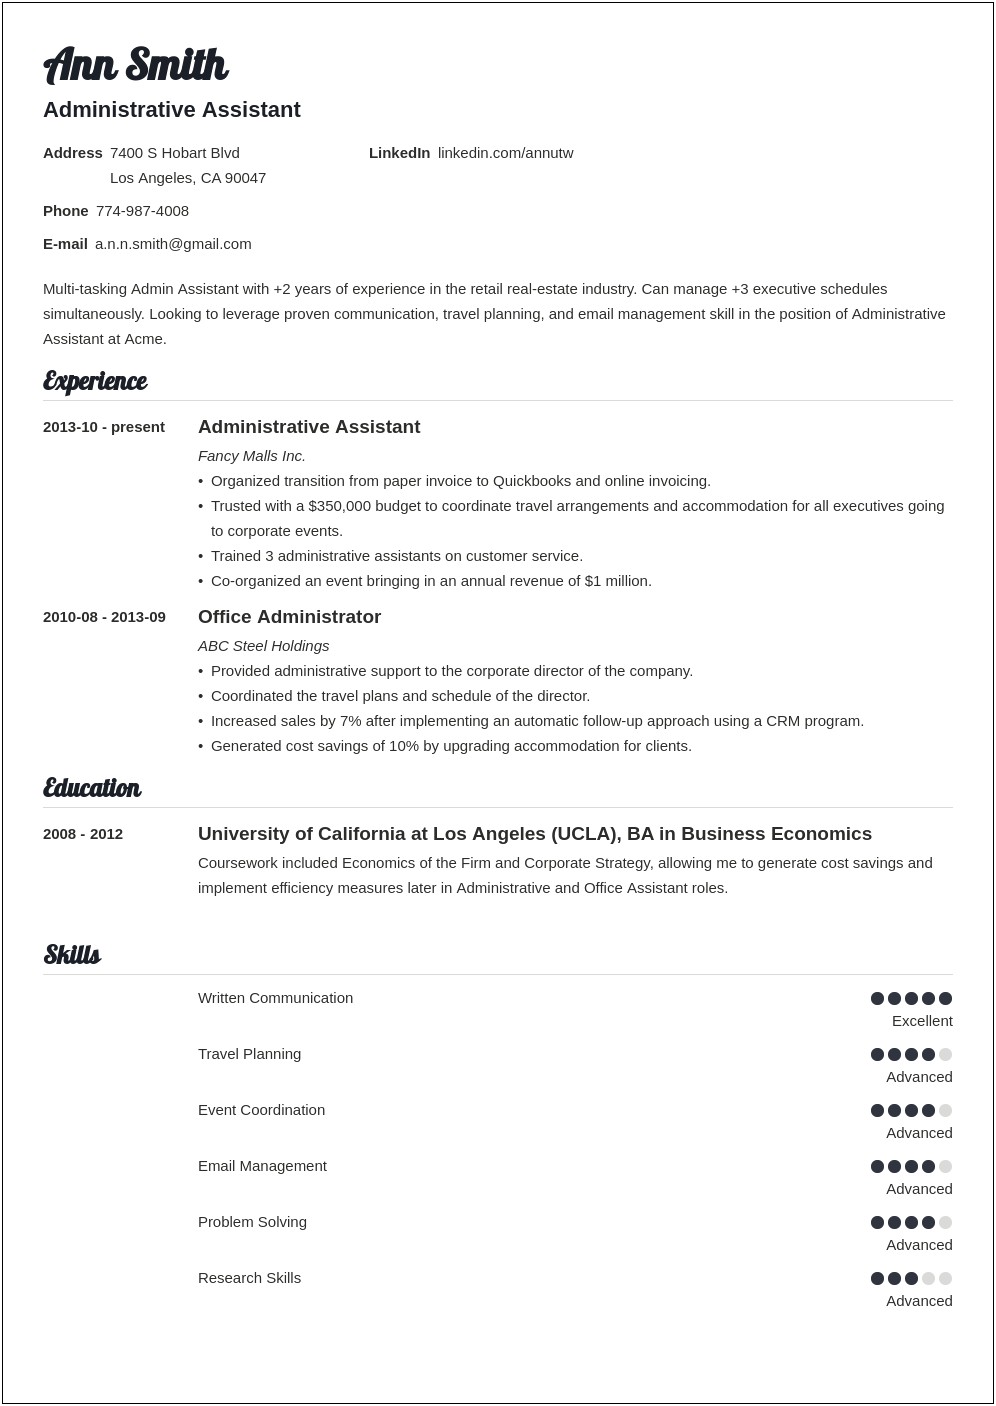 Summary Of Qualifications Sample Resume For Administrative Assistant